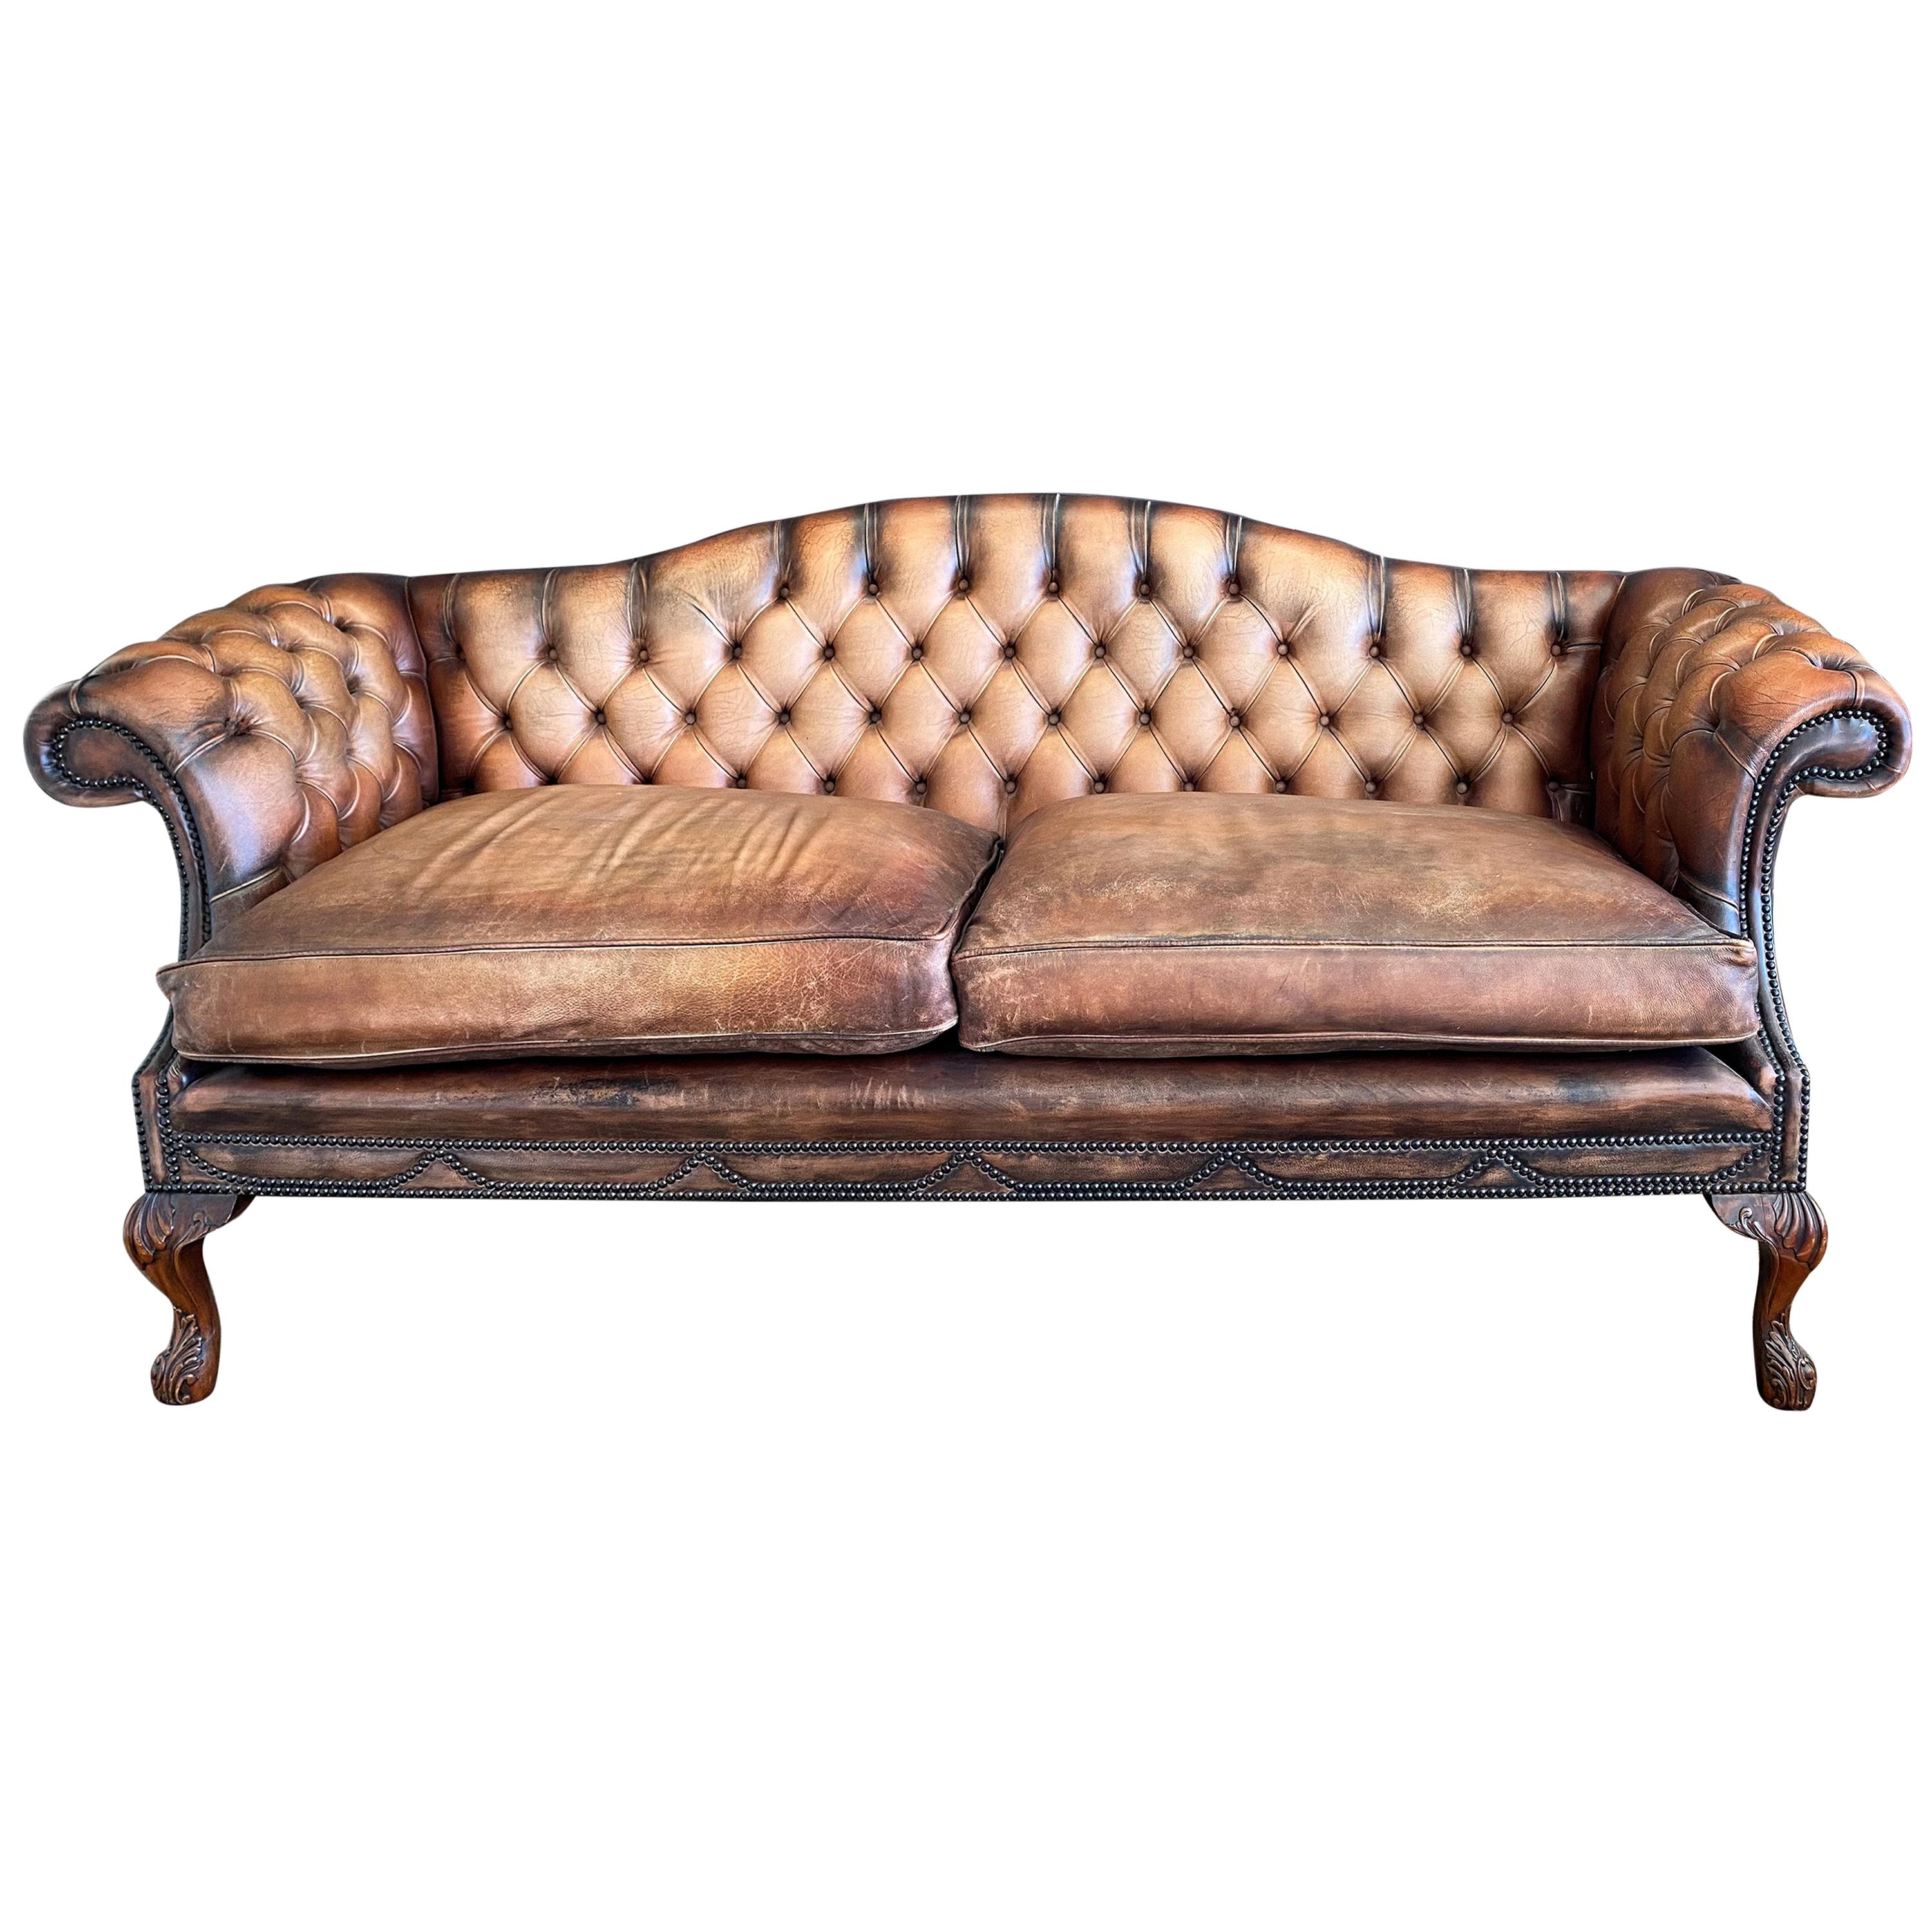 English Handmade Leather Sofa in the Chippendale Design